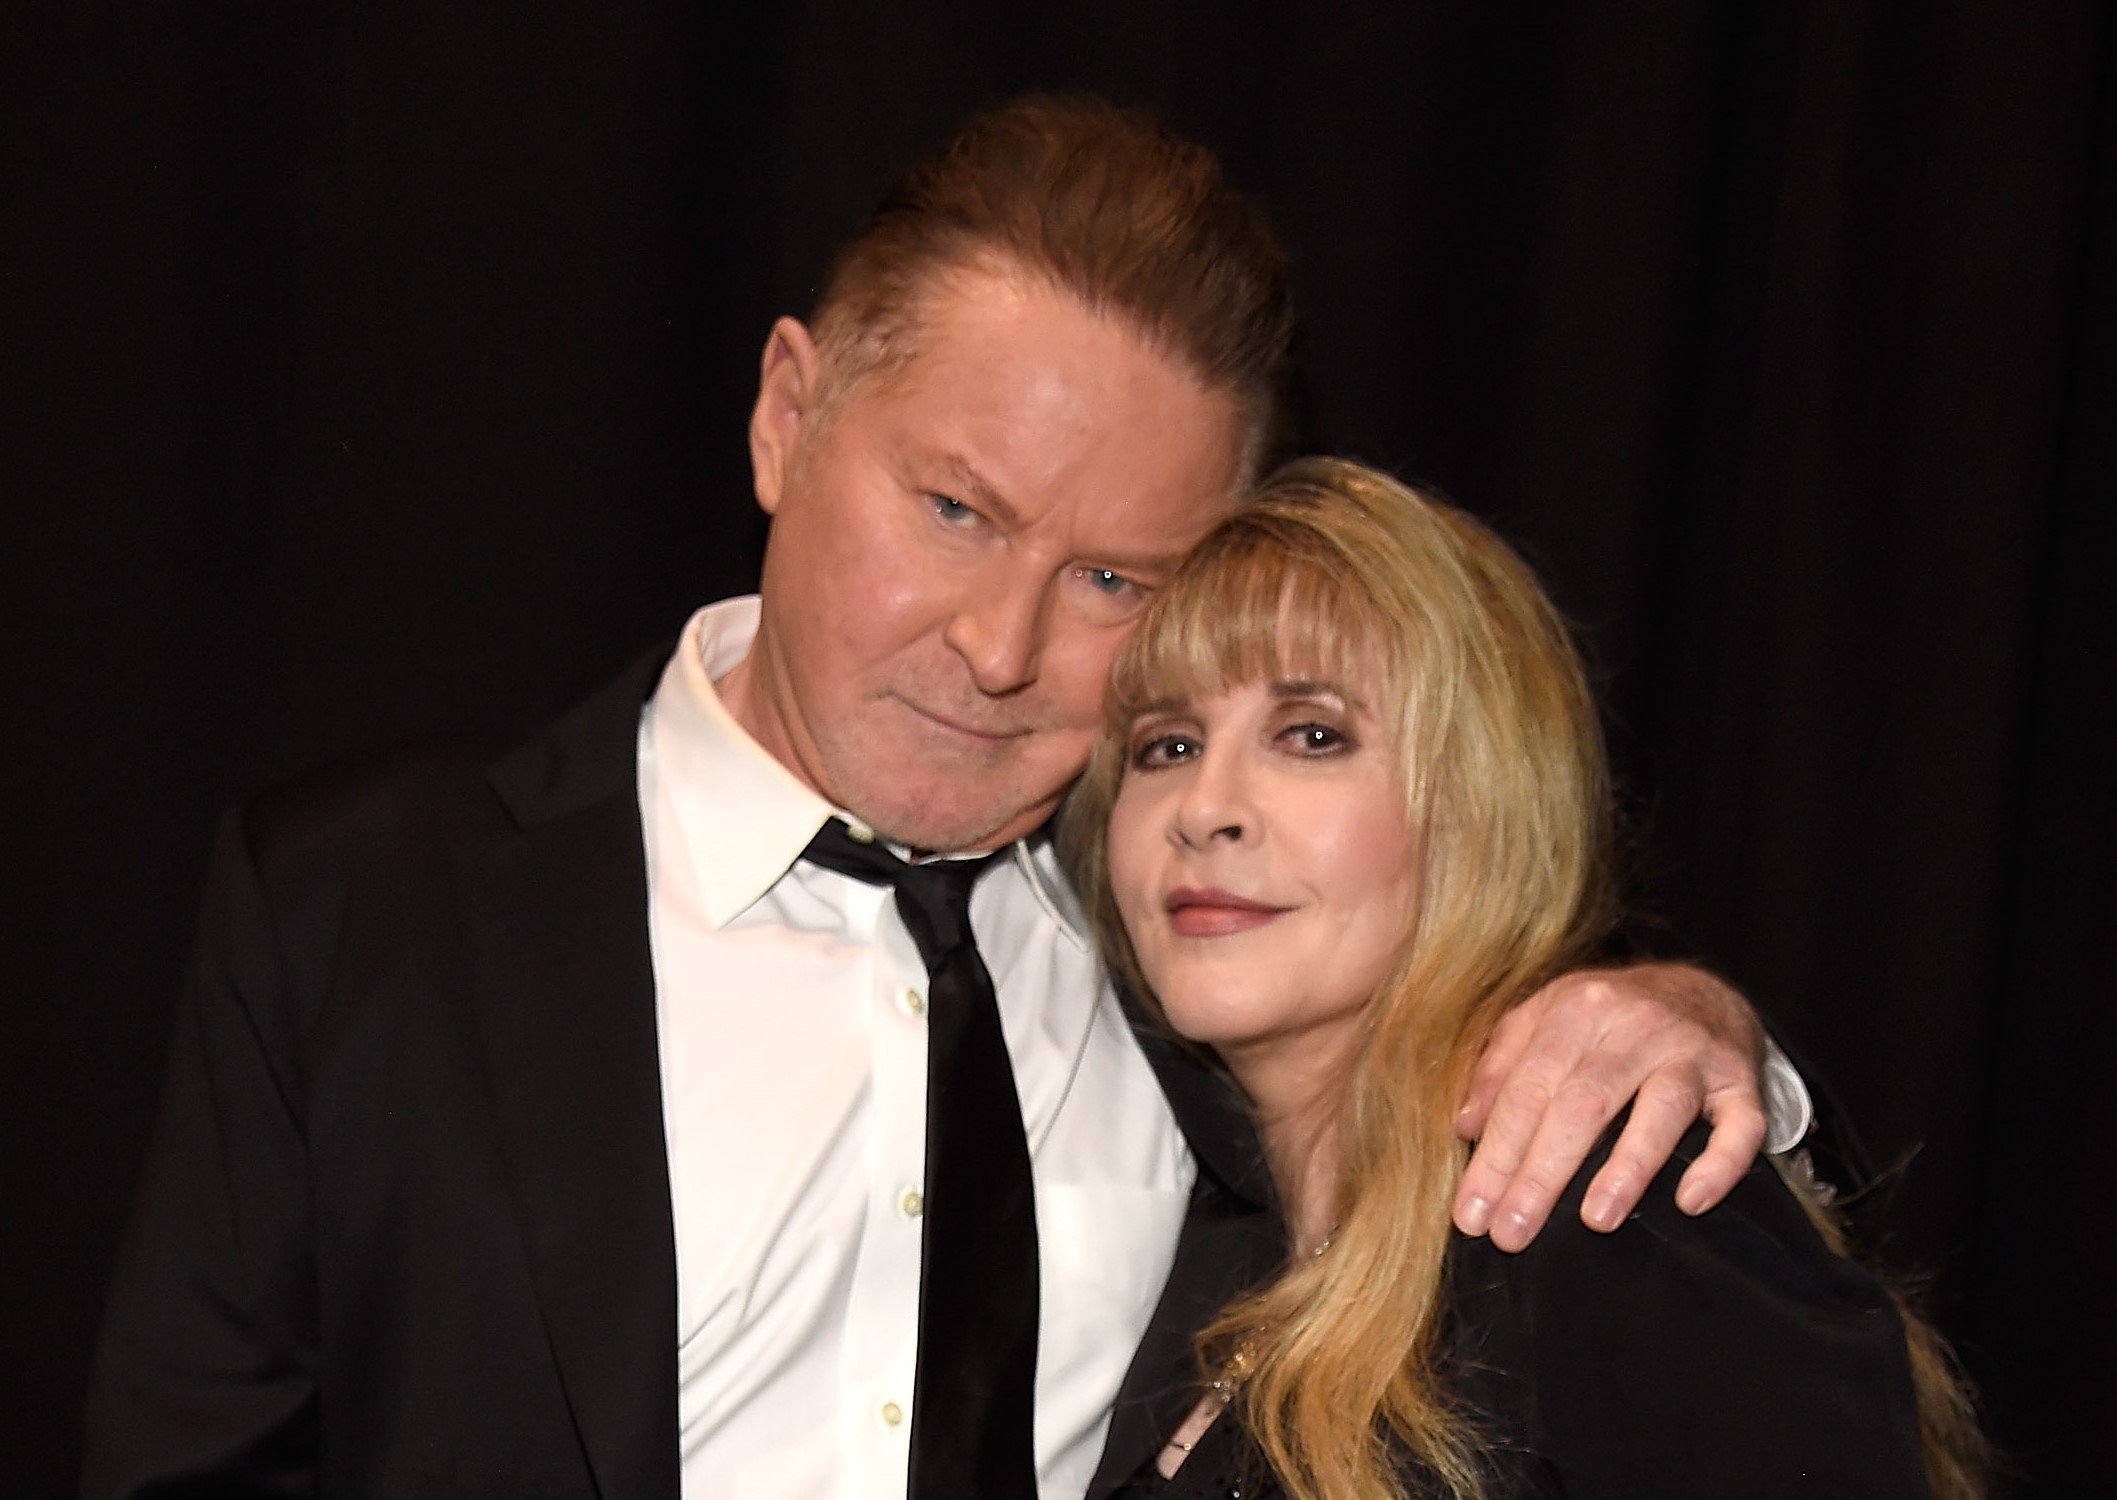 Don Henley wears a suit and holds his arm around Stevie Nicks' shoulder. She wears a black dress.